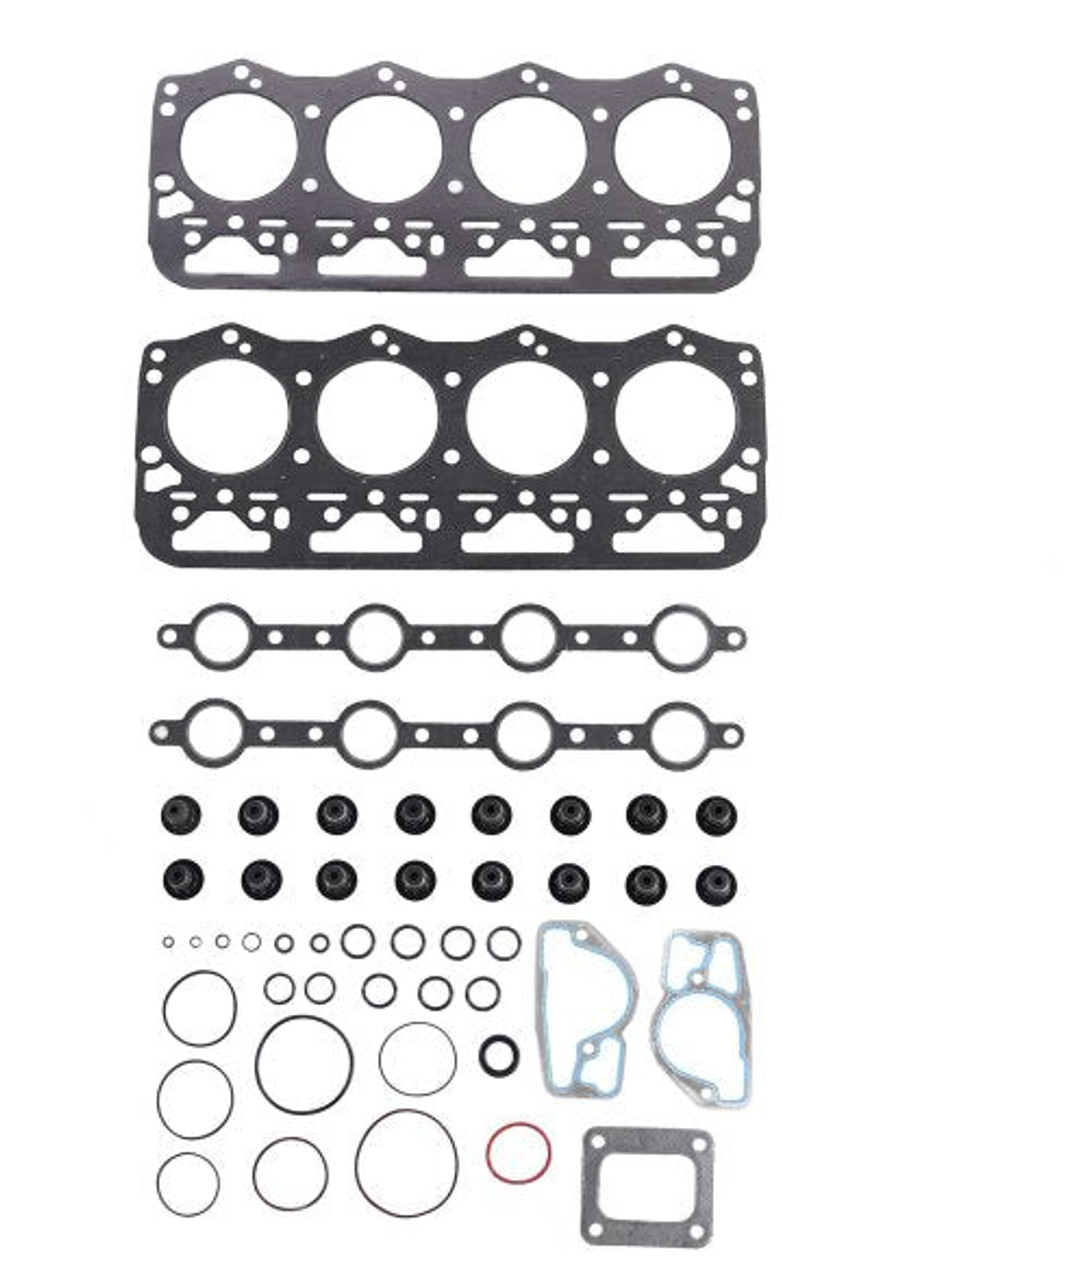 Head Gasket Set with Head Bolt Kit - 1999 Ford E-350 Super Duty 7.3L Engine Parts # HGB4200ZE14